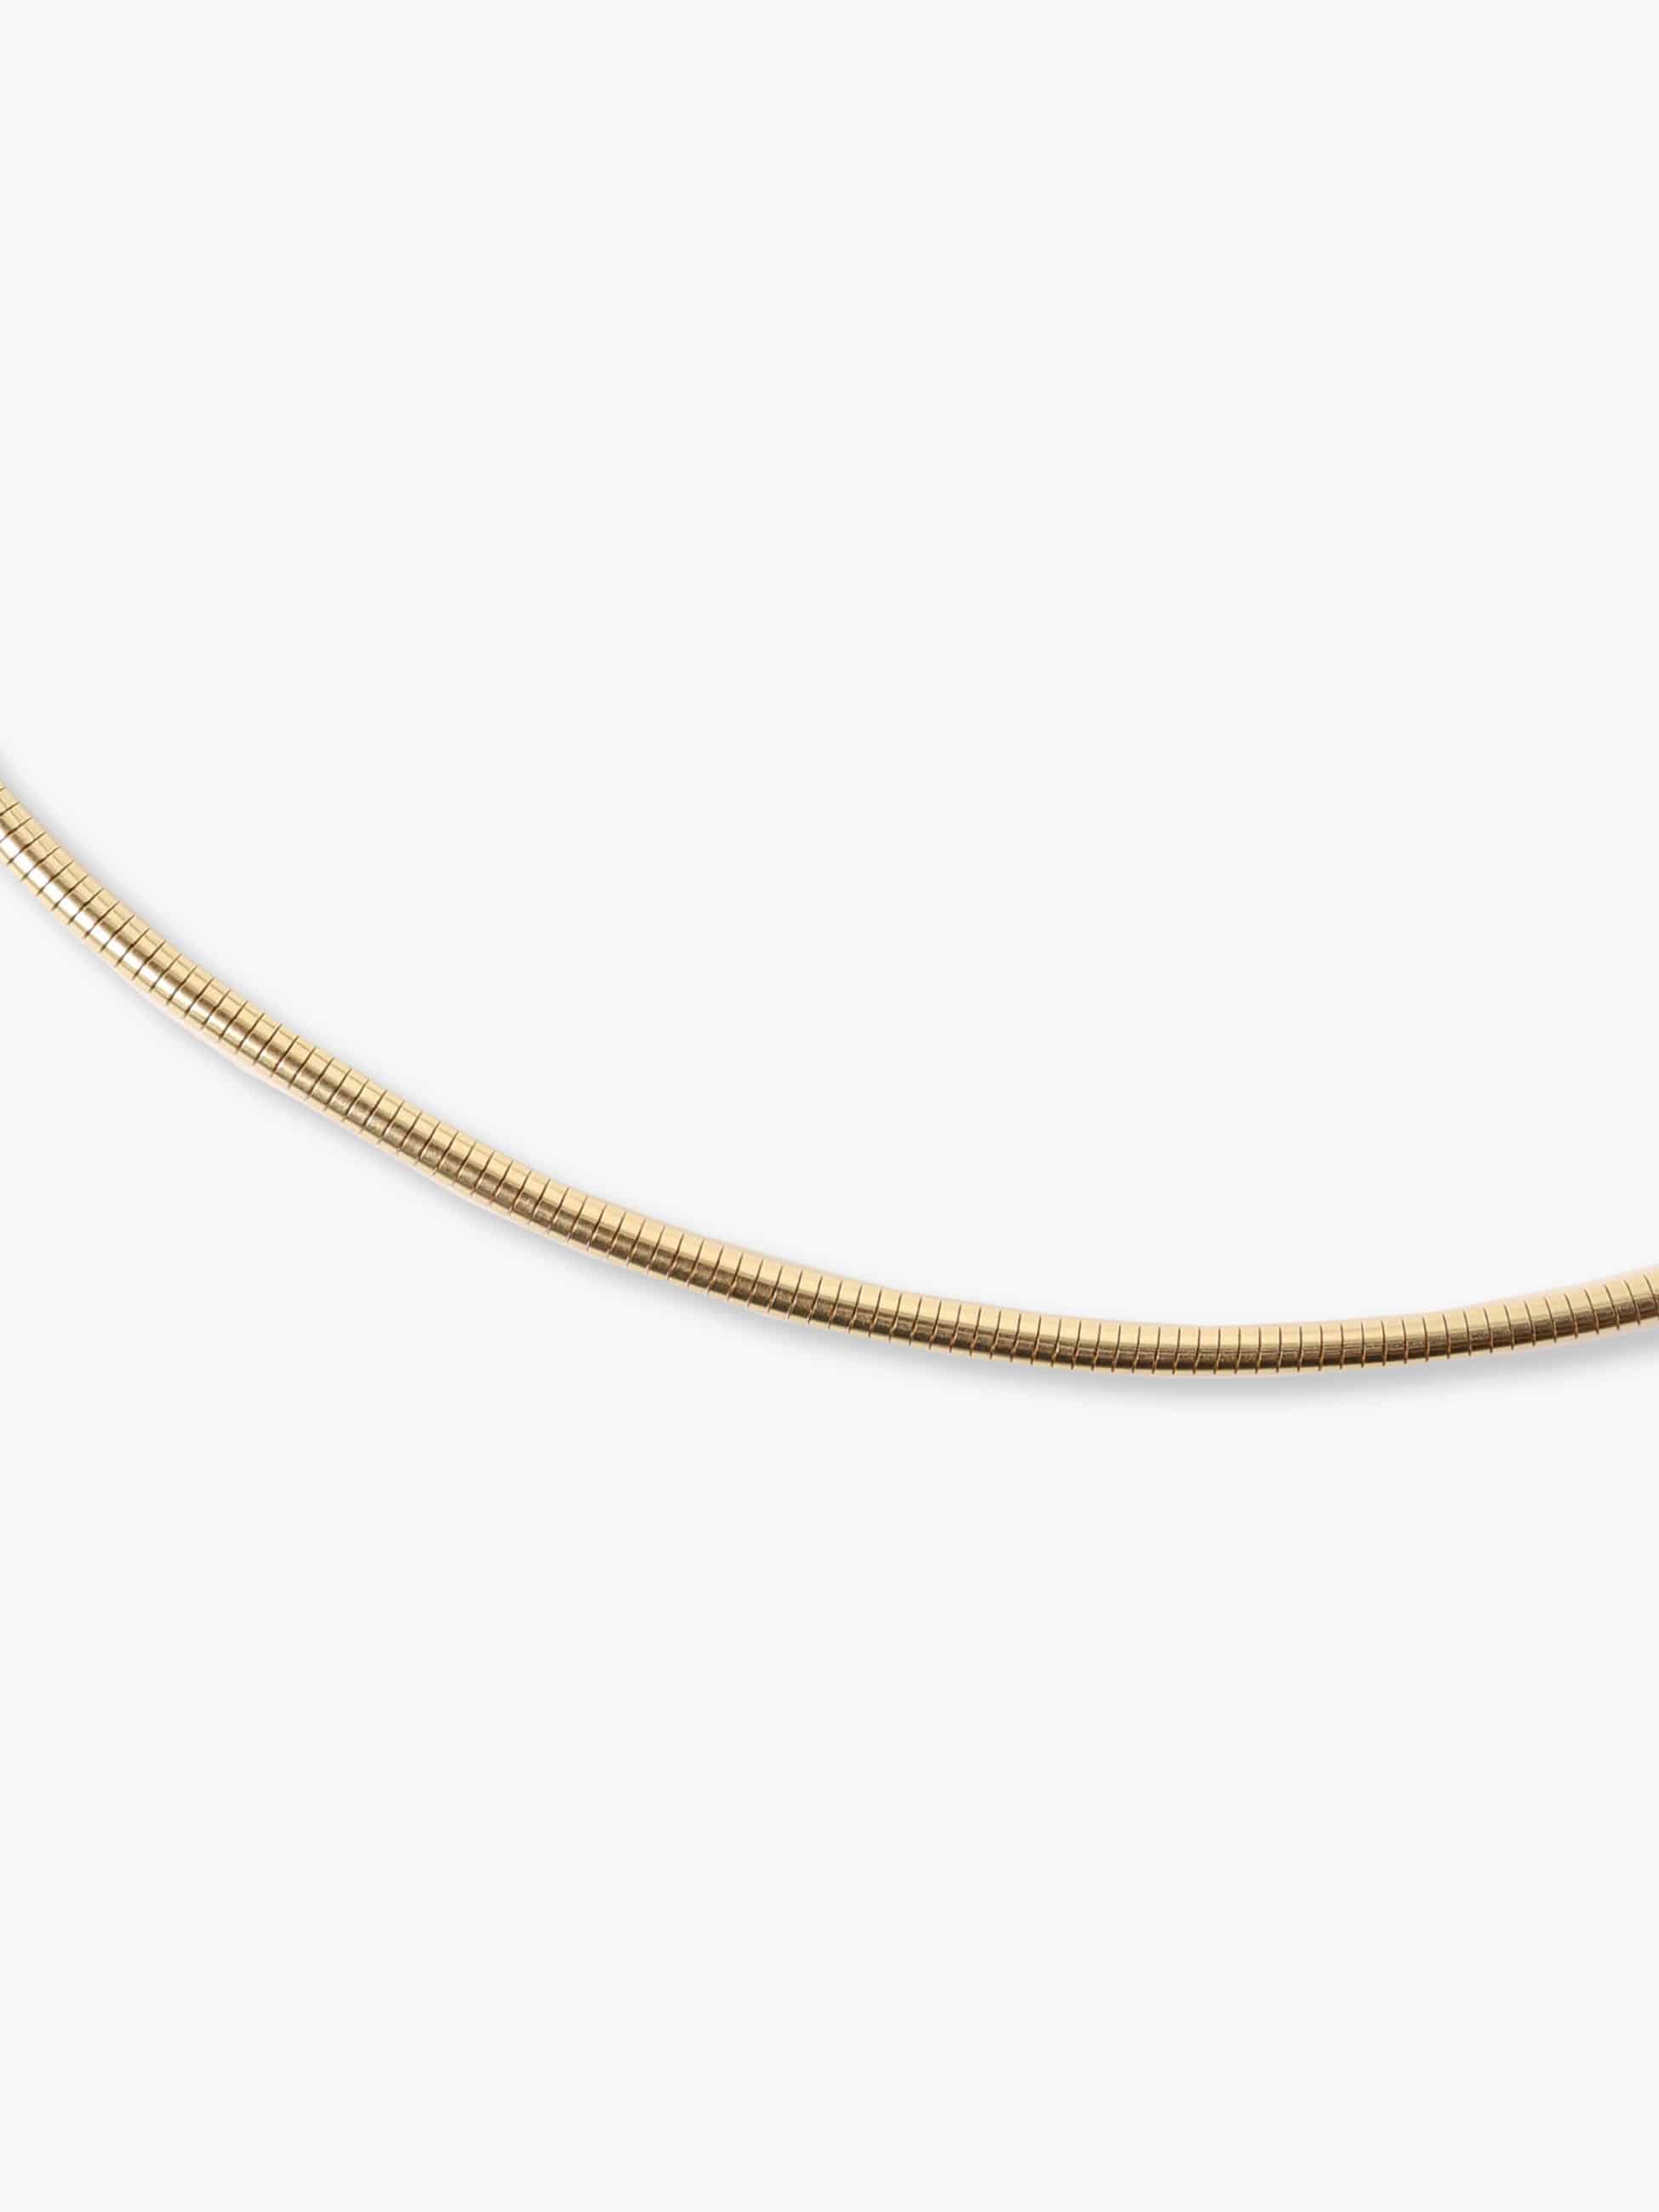 Silky Snake Chain Necklace (20inch) 詳細画像 yellow gold 1